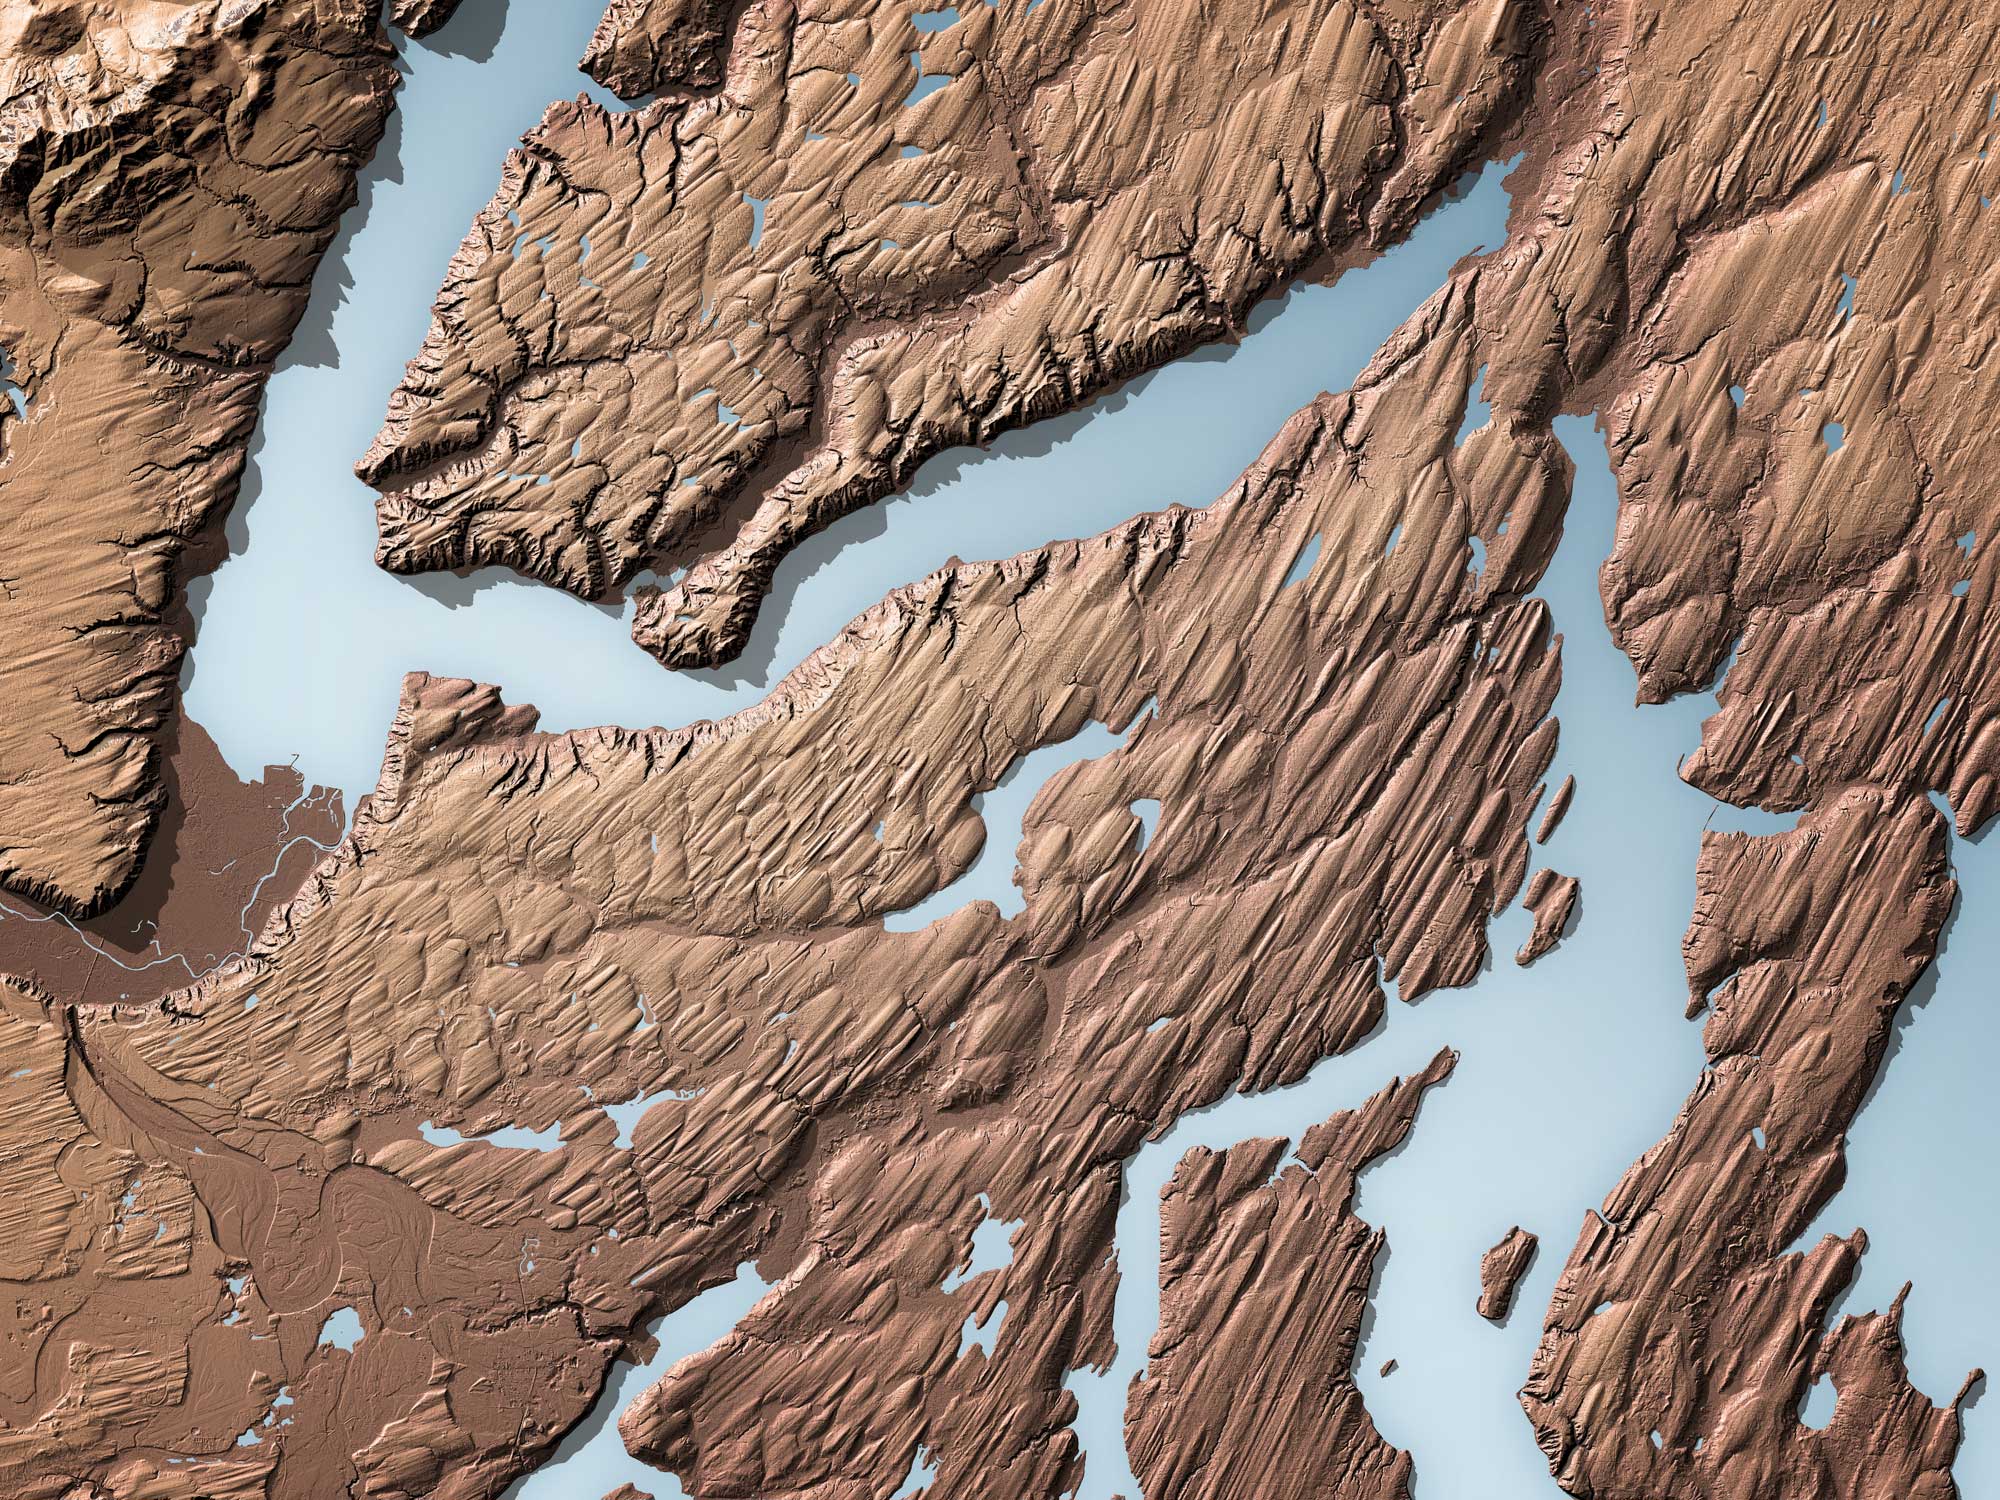 Digital model of the landscape at Hood Canal, Puget Lowland, Washington. The image shows a series of parallel hills or ridges running from the lower left to the upper right. These are glacial landforms called drumlins.